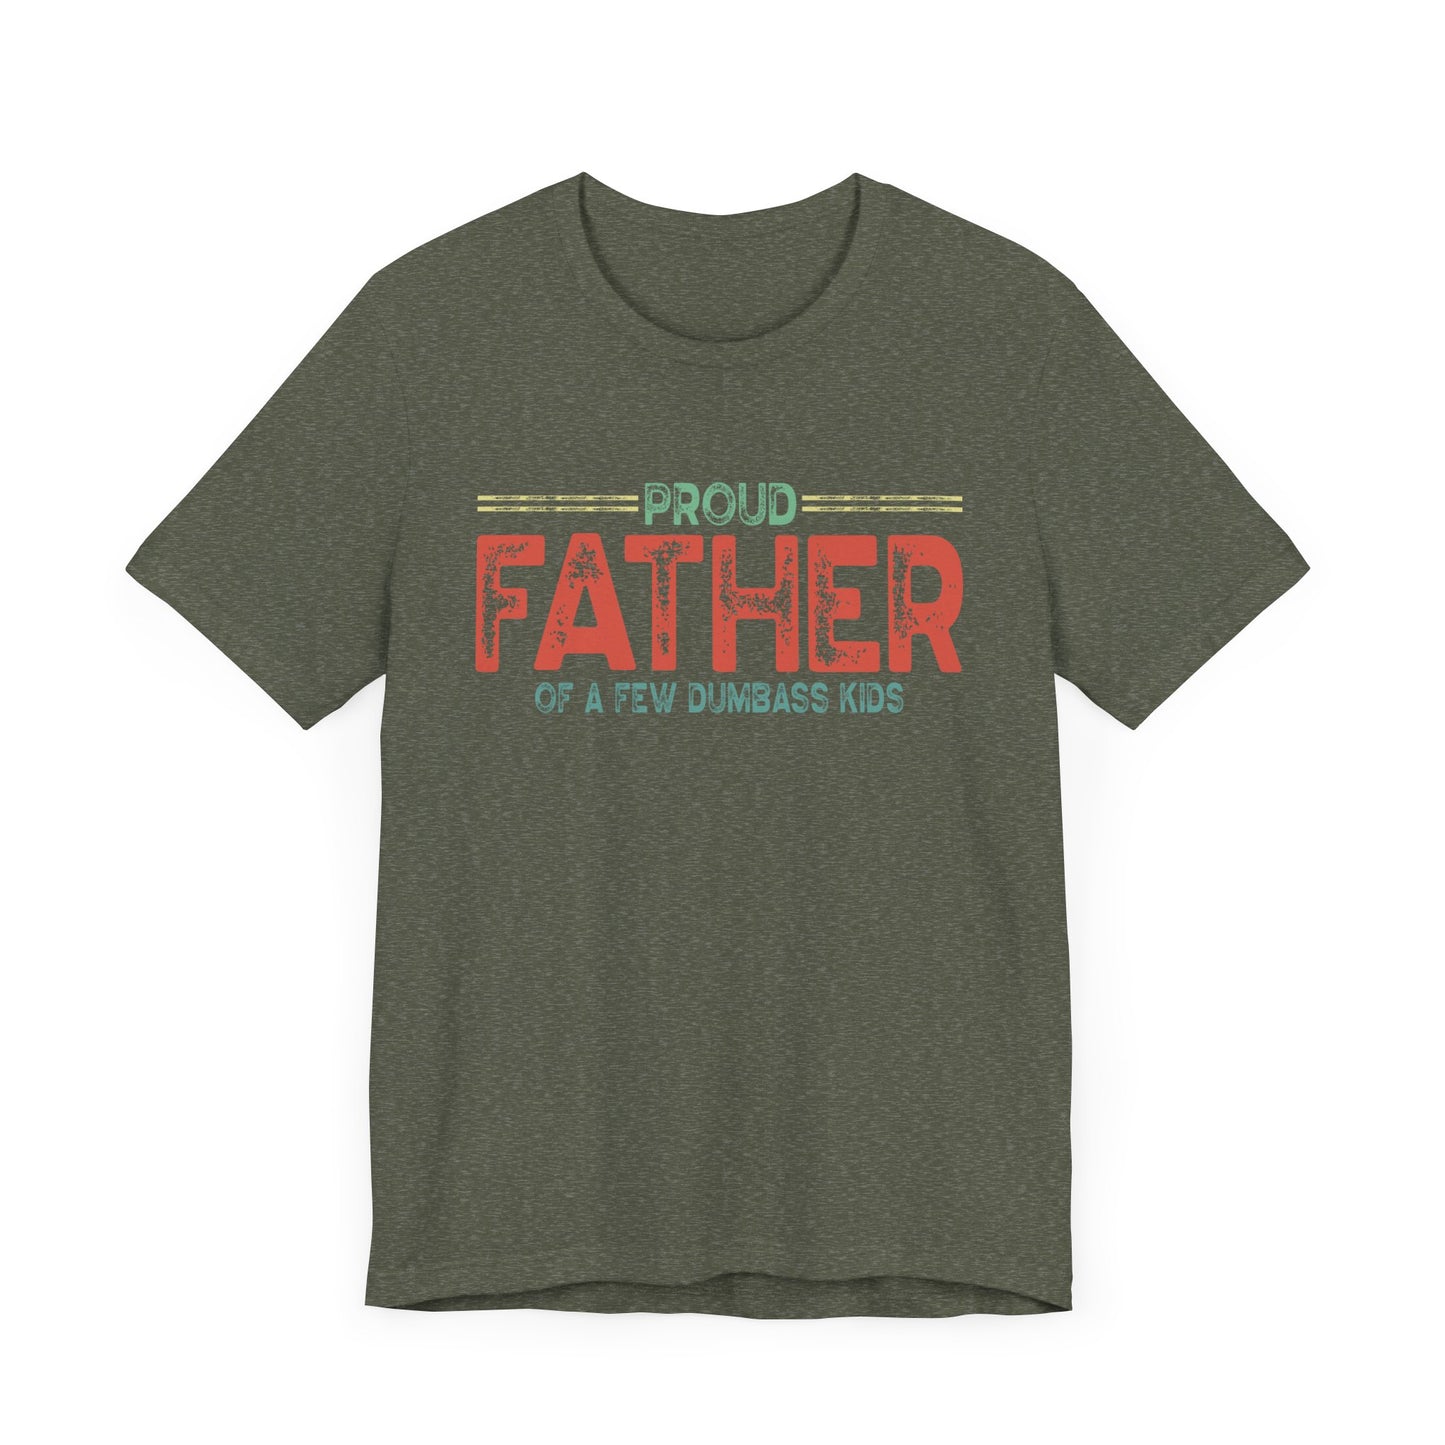 Proud Father of a Few Dumb*** Kids Funny Short Sleeve Tee